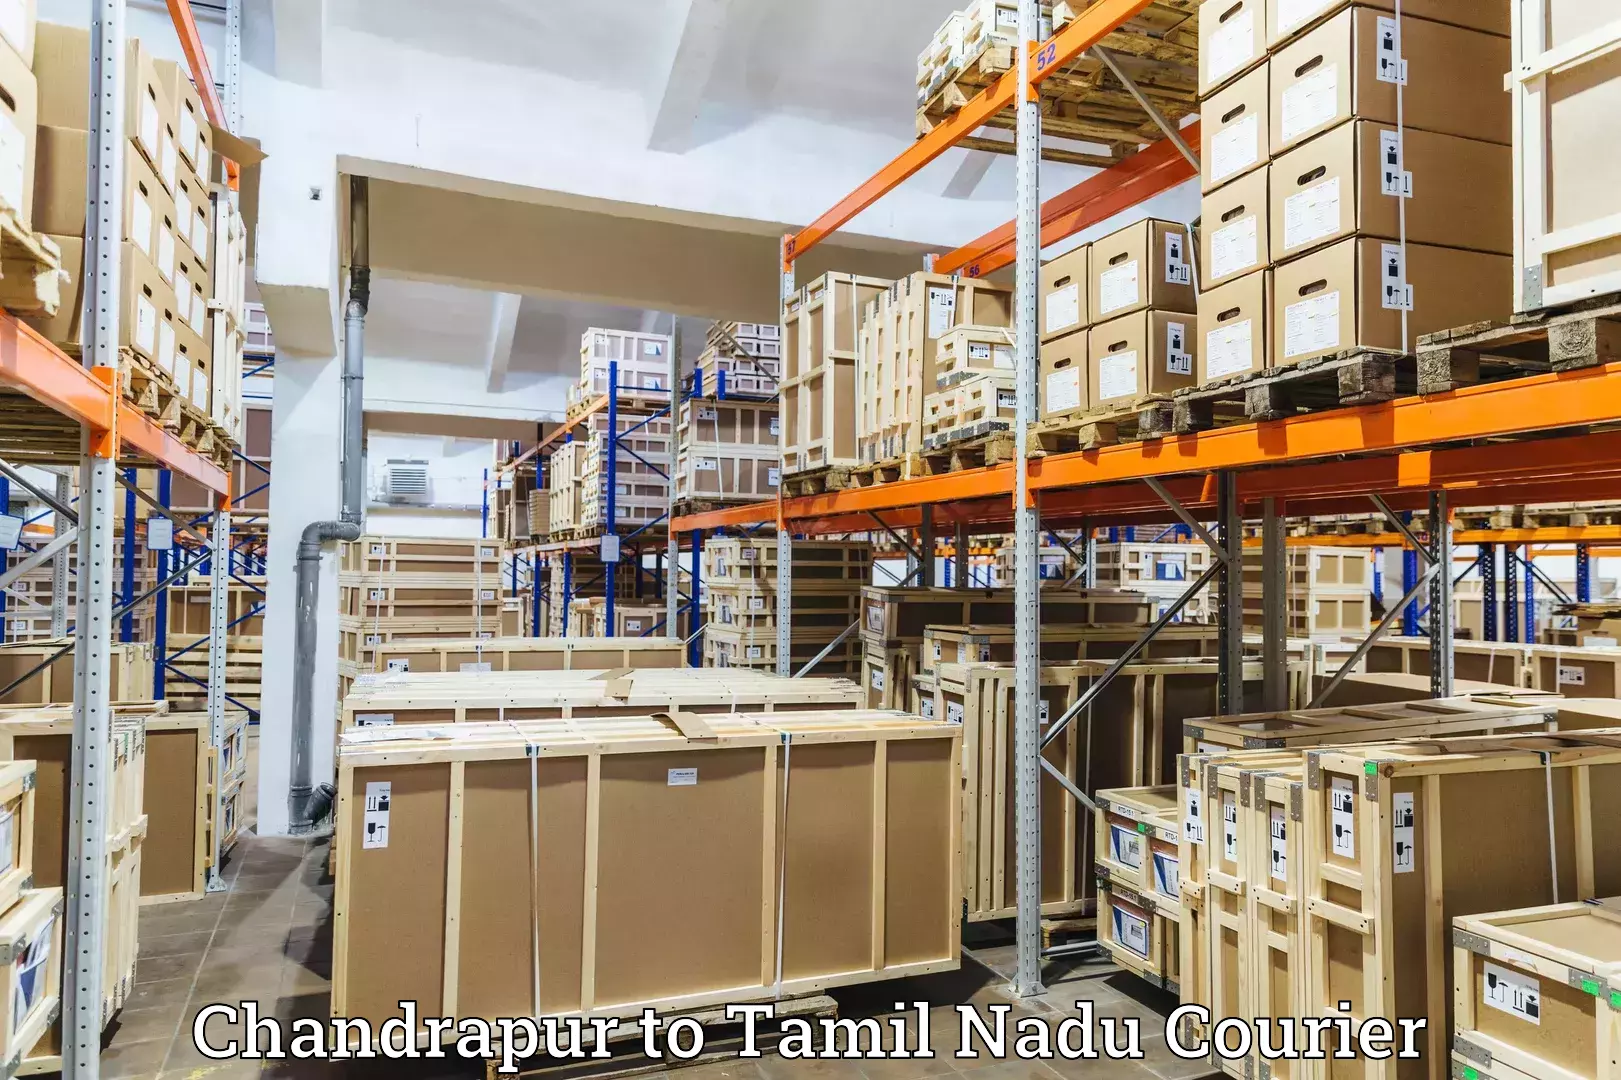 Same-day delivery options Chandrapur to Thiruvarur